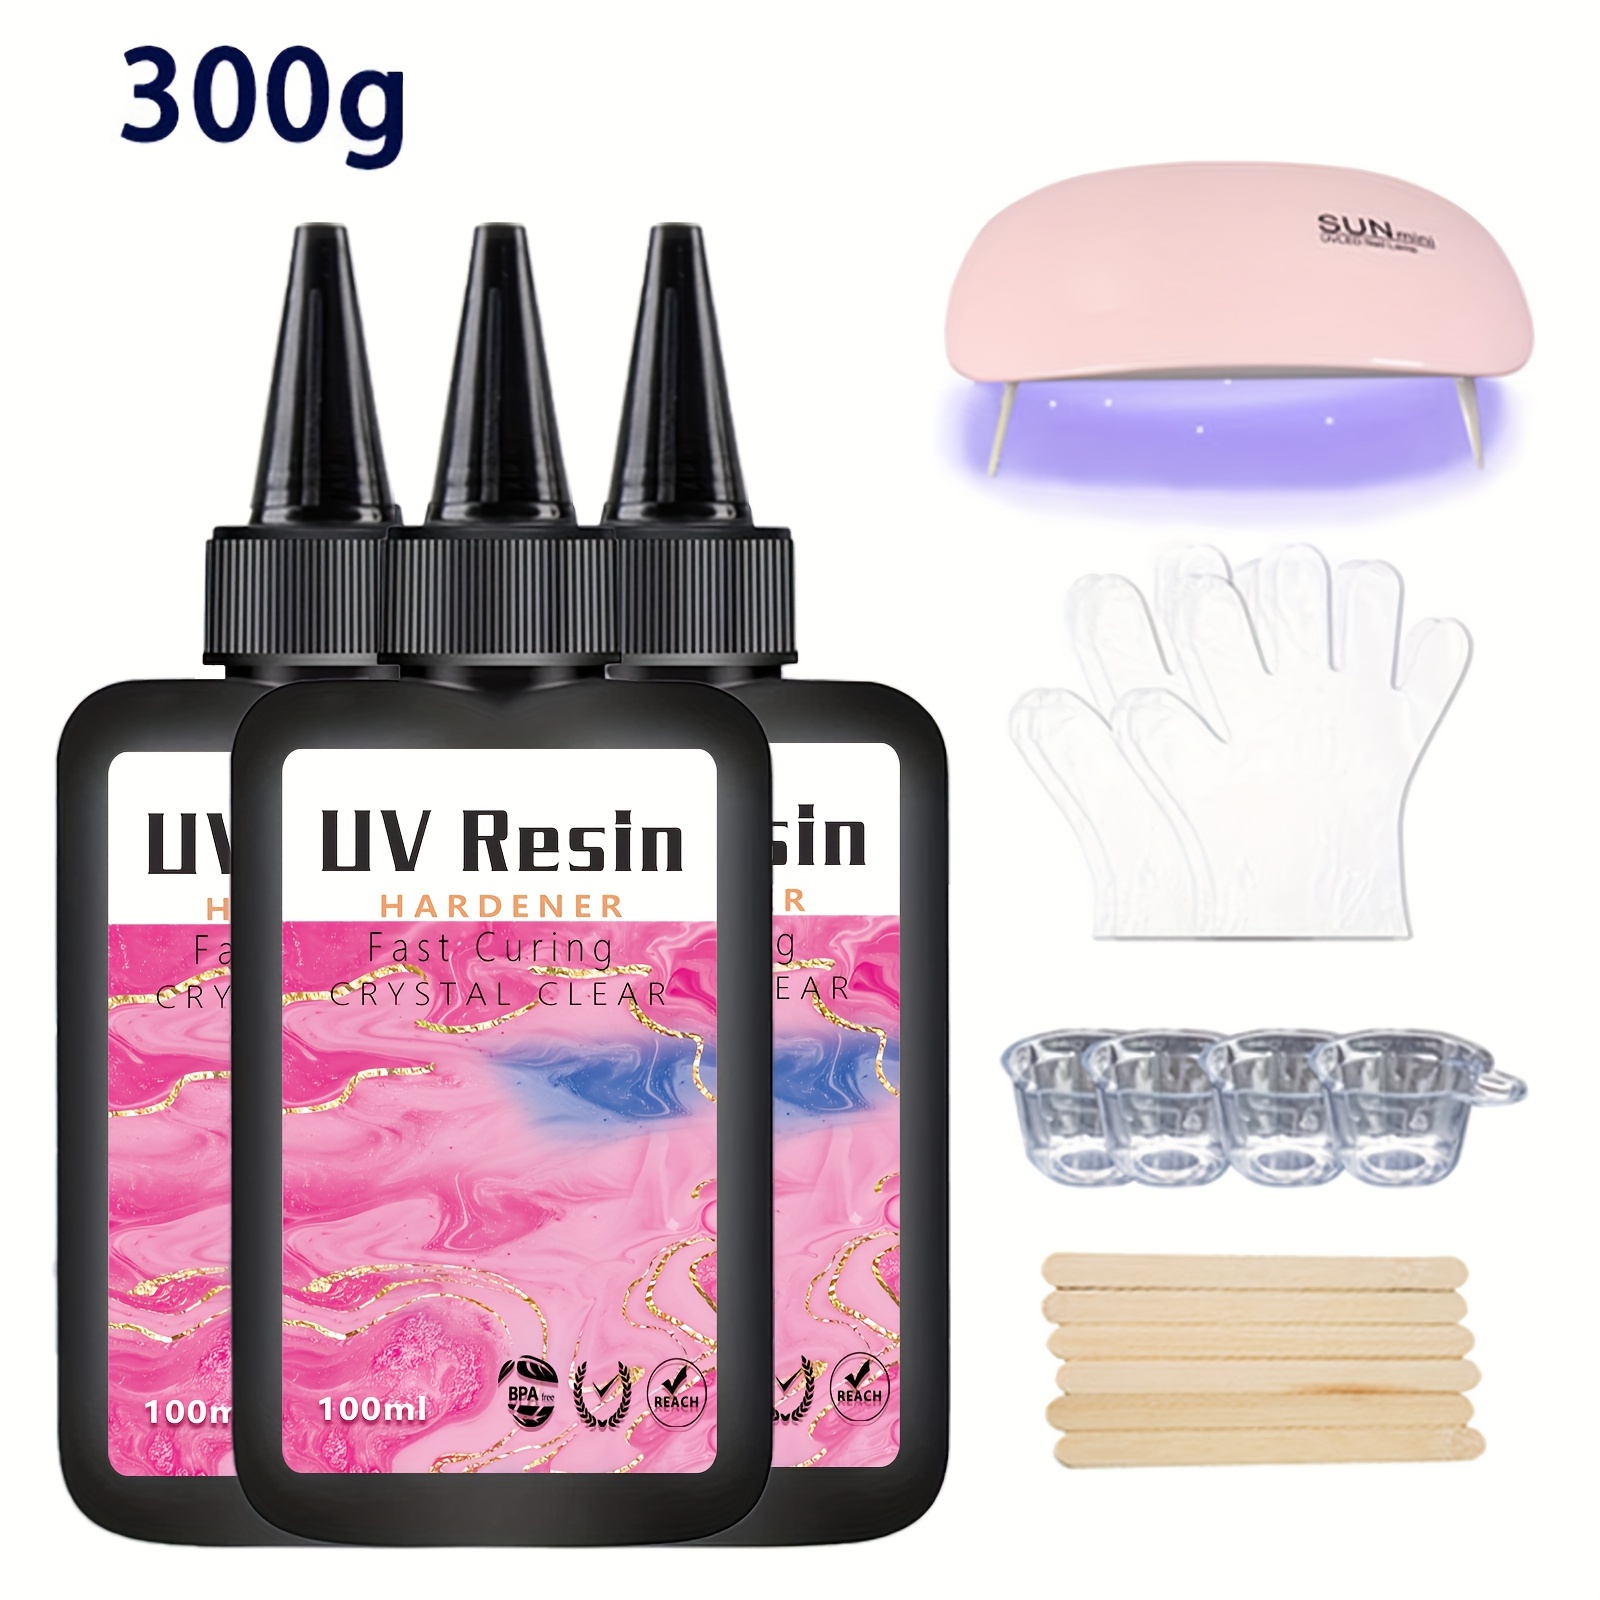 Upgraded Uv Resin Kit- Clear Hard Uv Cure Epoxy Resin Supplies